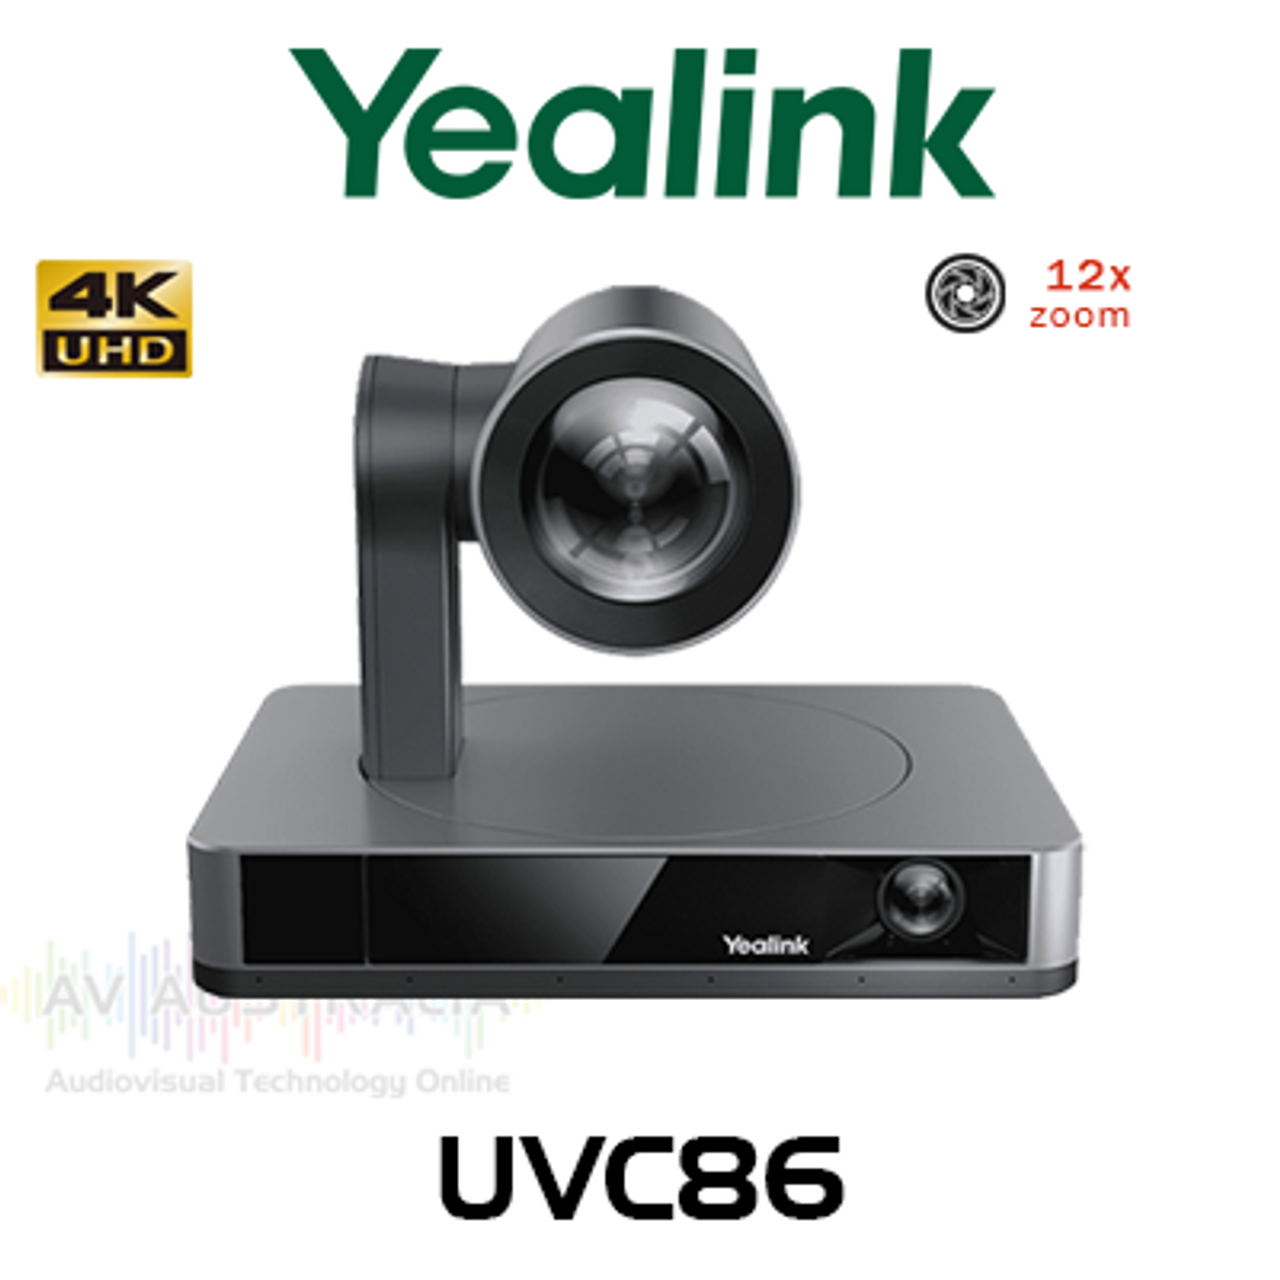 Yealink UVC86 Dual-Eye 4K 12x Optical PTZ Conference Camera For Mid & Large Room